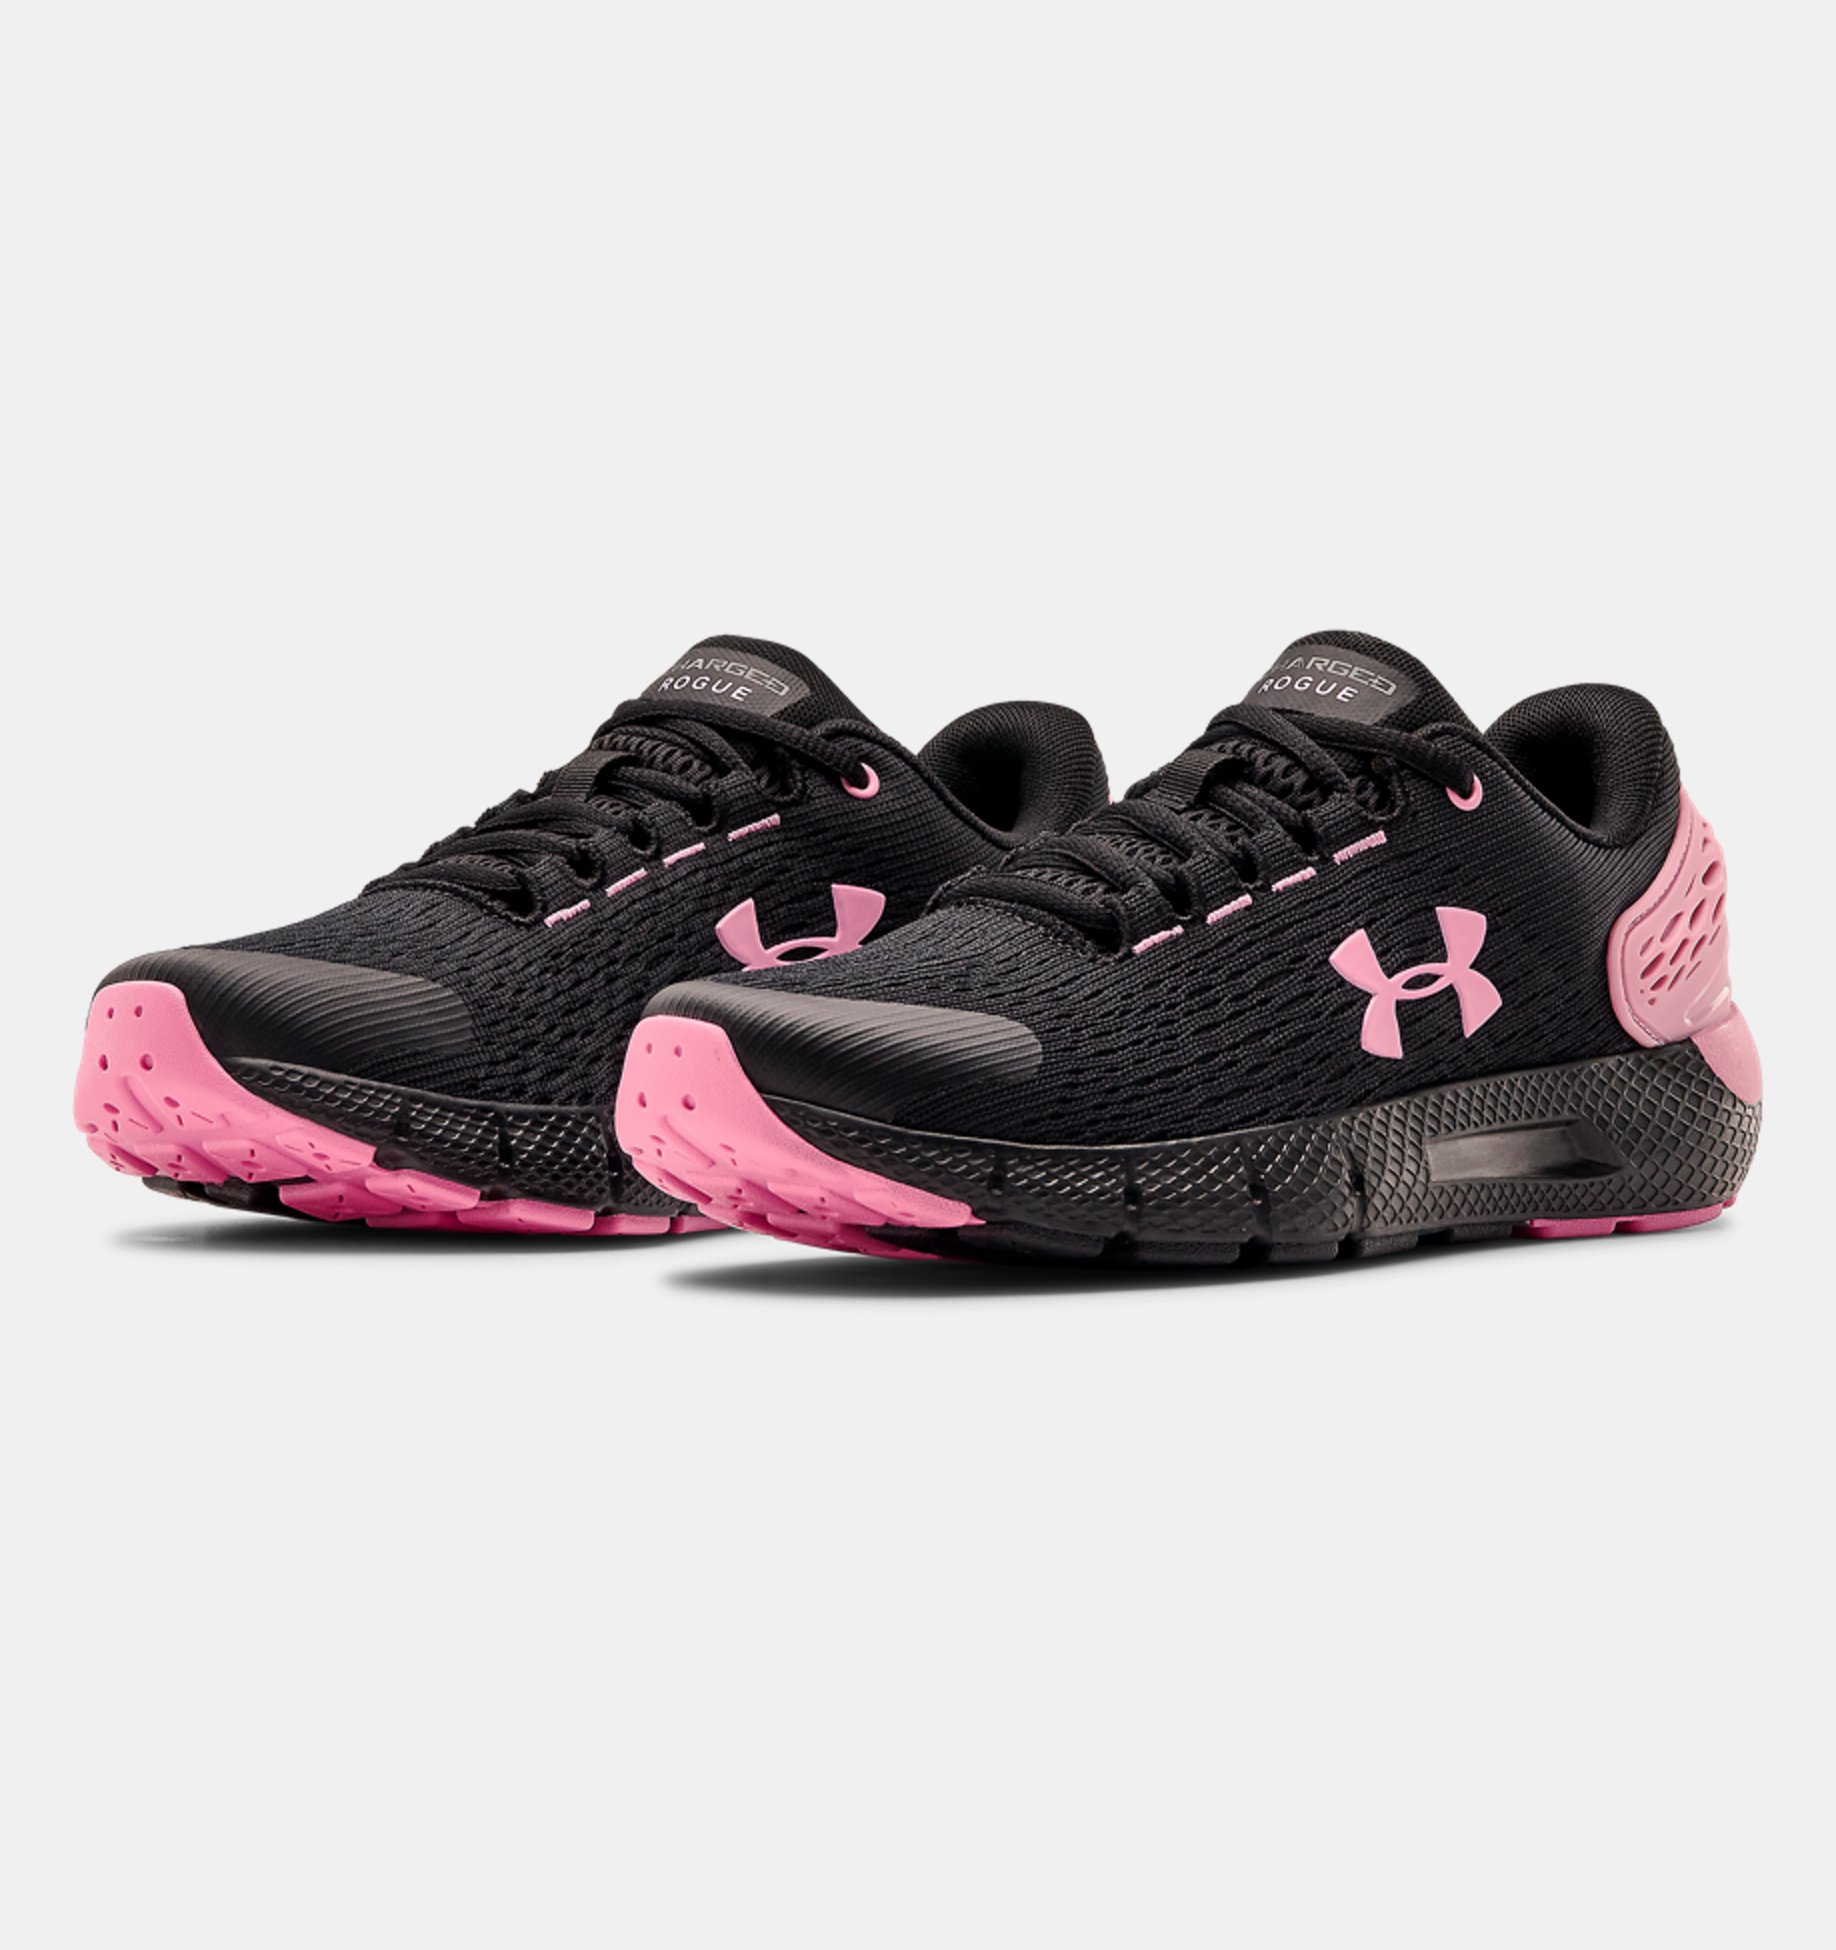 Under Armour Kids Grade School Charged Rogue Sneaker 